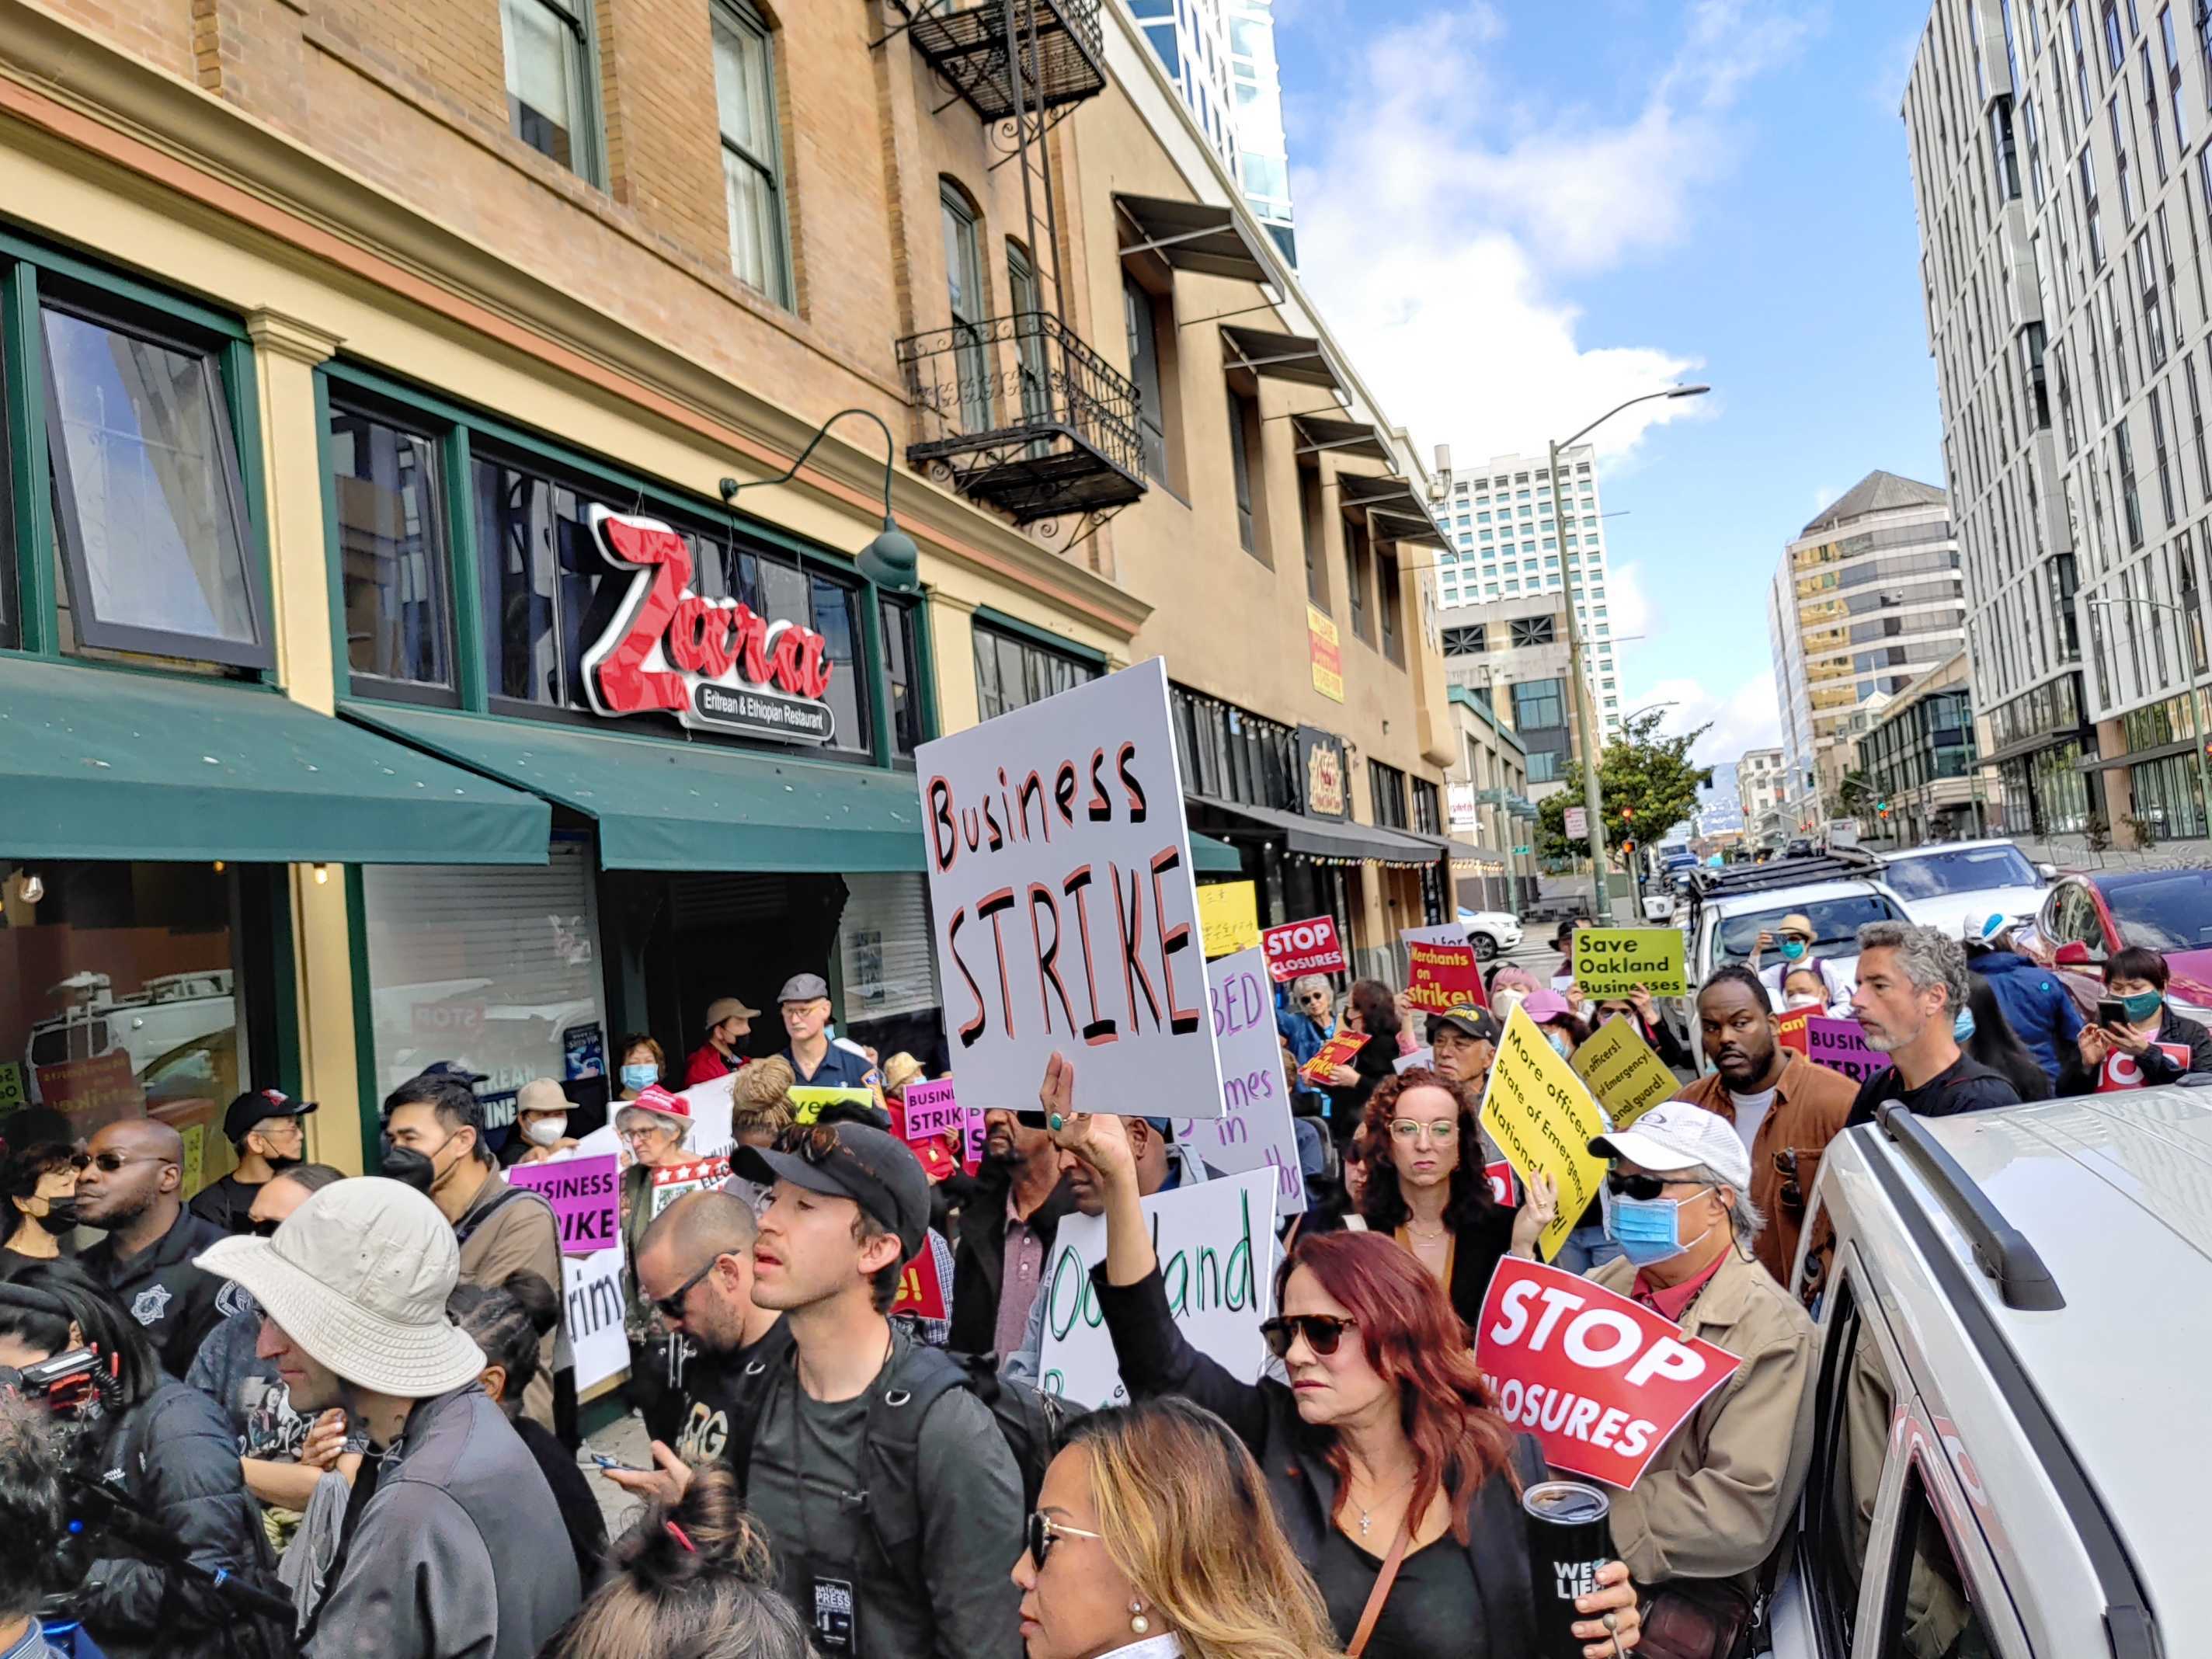 Oakland Businesses Shut Down in Protest Against Rising Crime, Activists Say